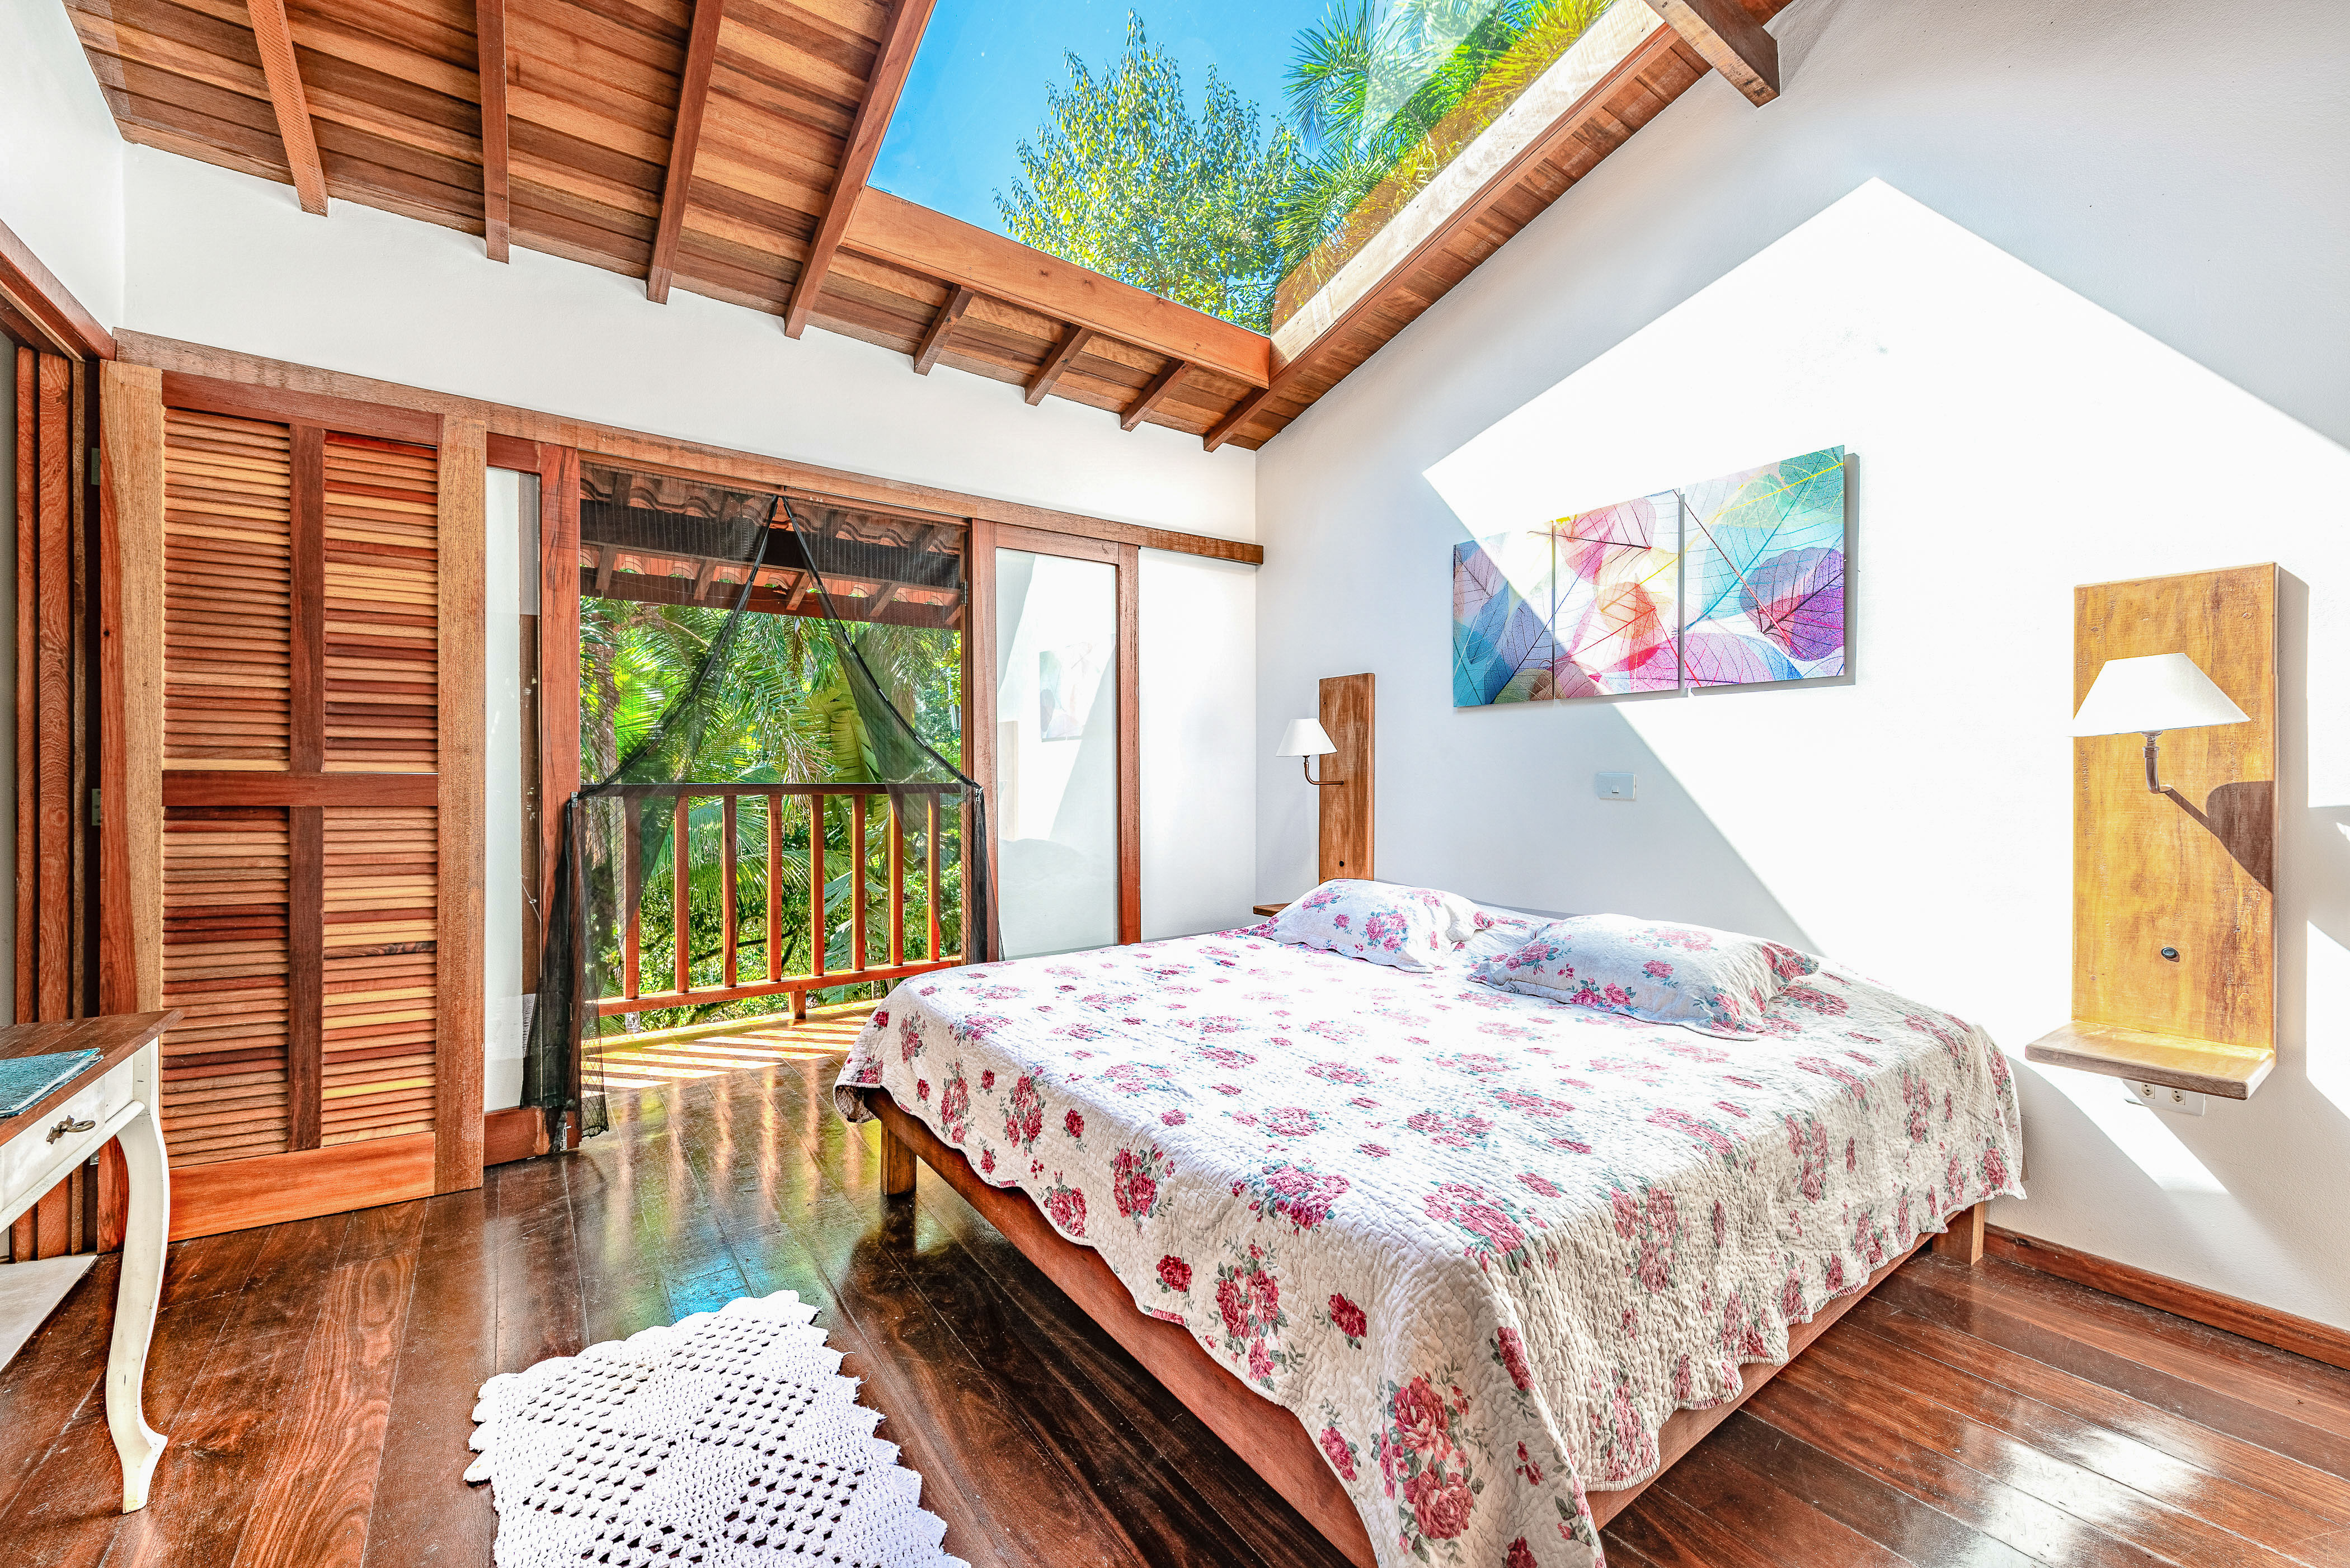 Bright bedroom with floral bedspread and wood paneled ceilings lit by a skylight and open terrace door.